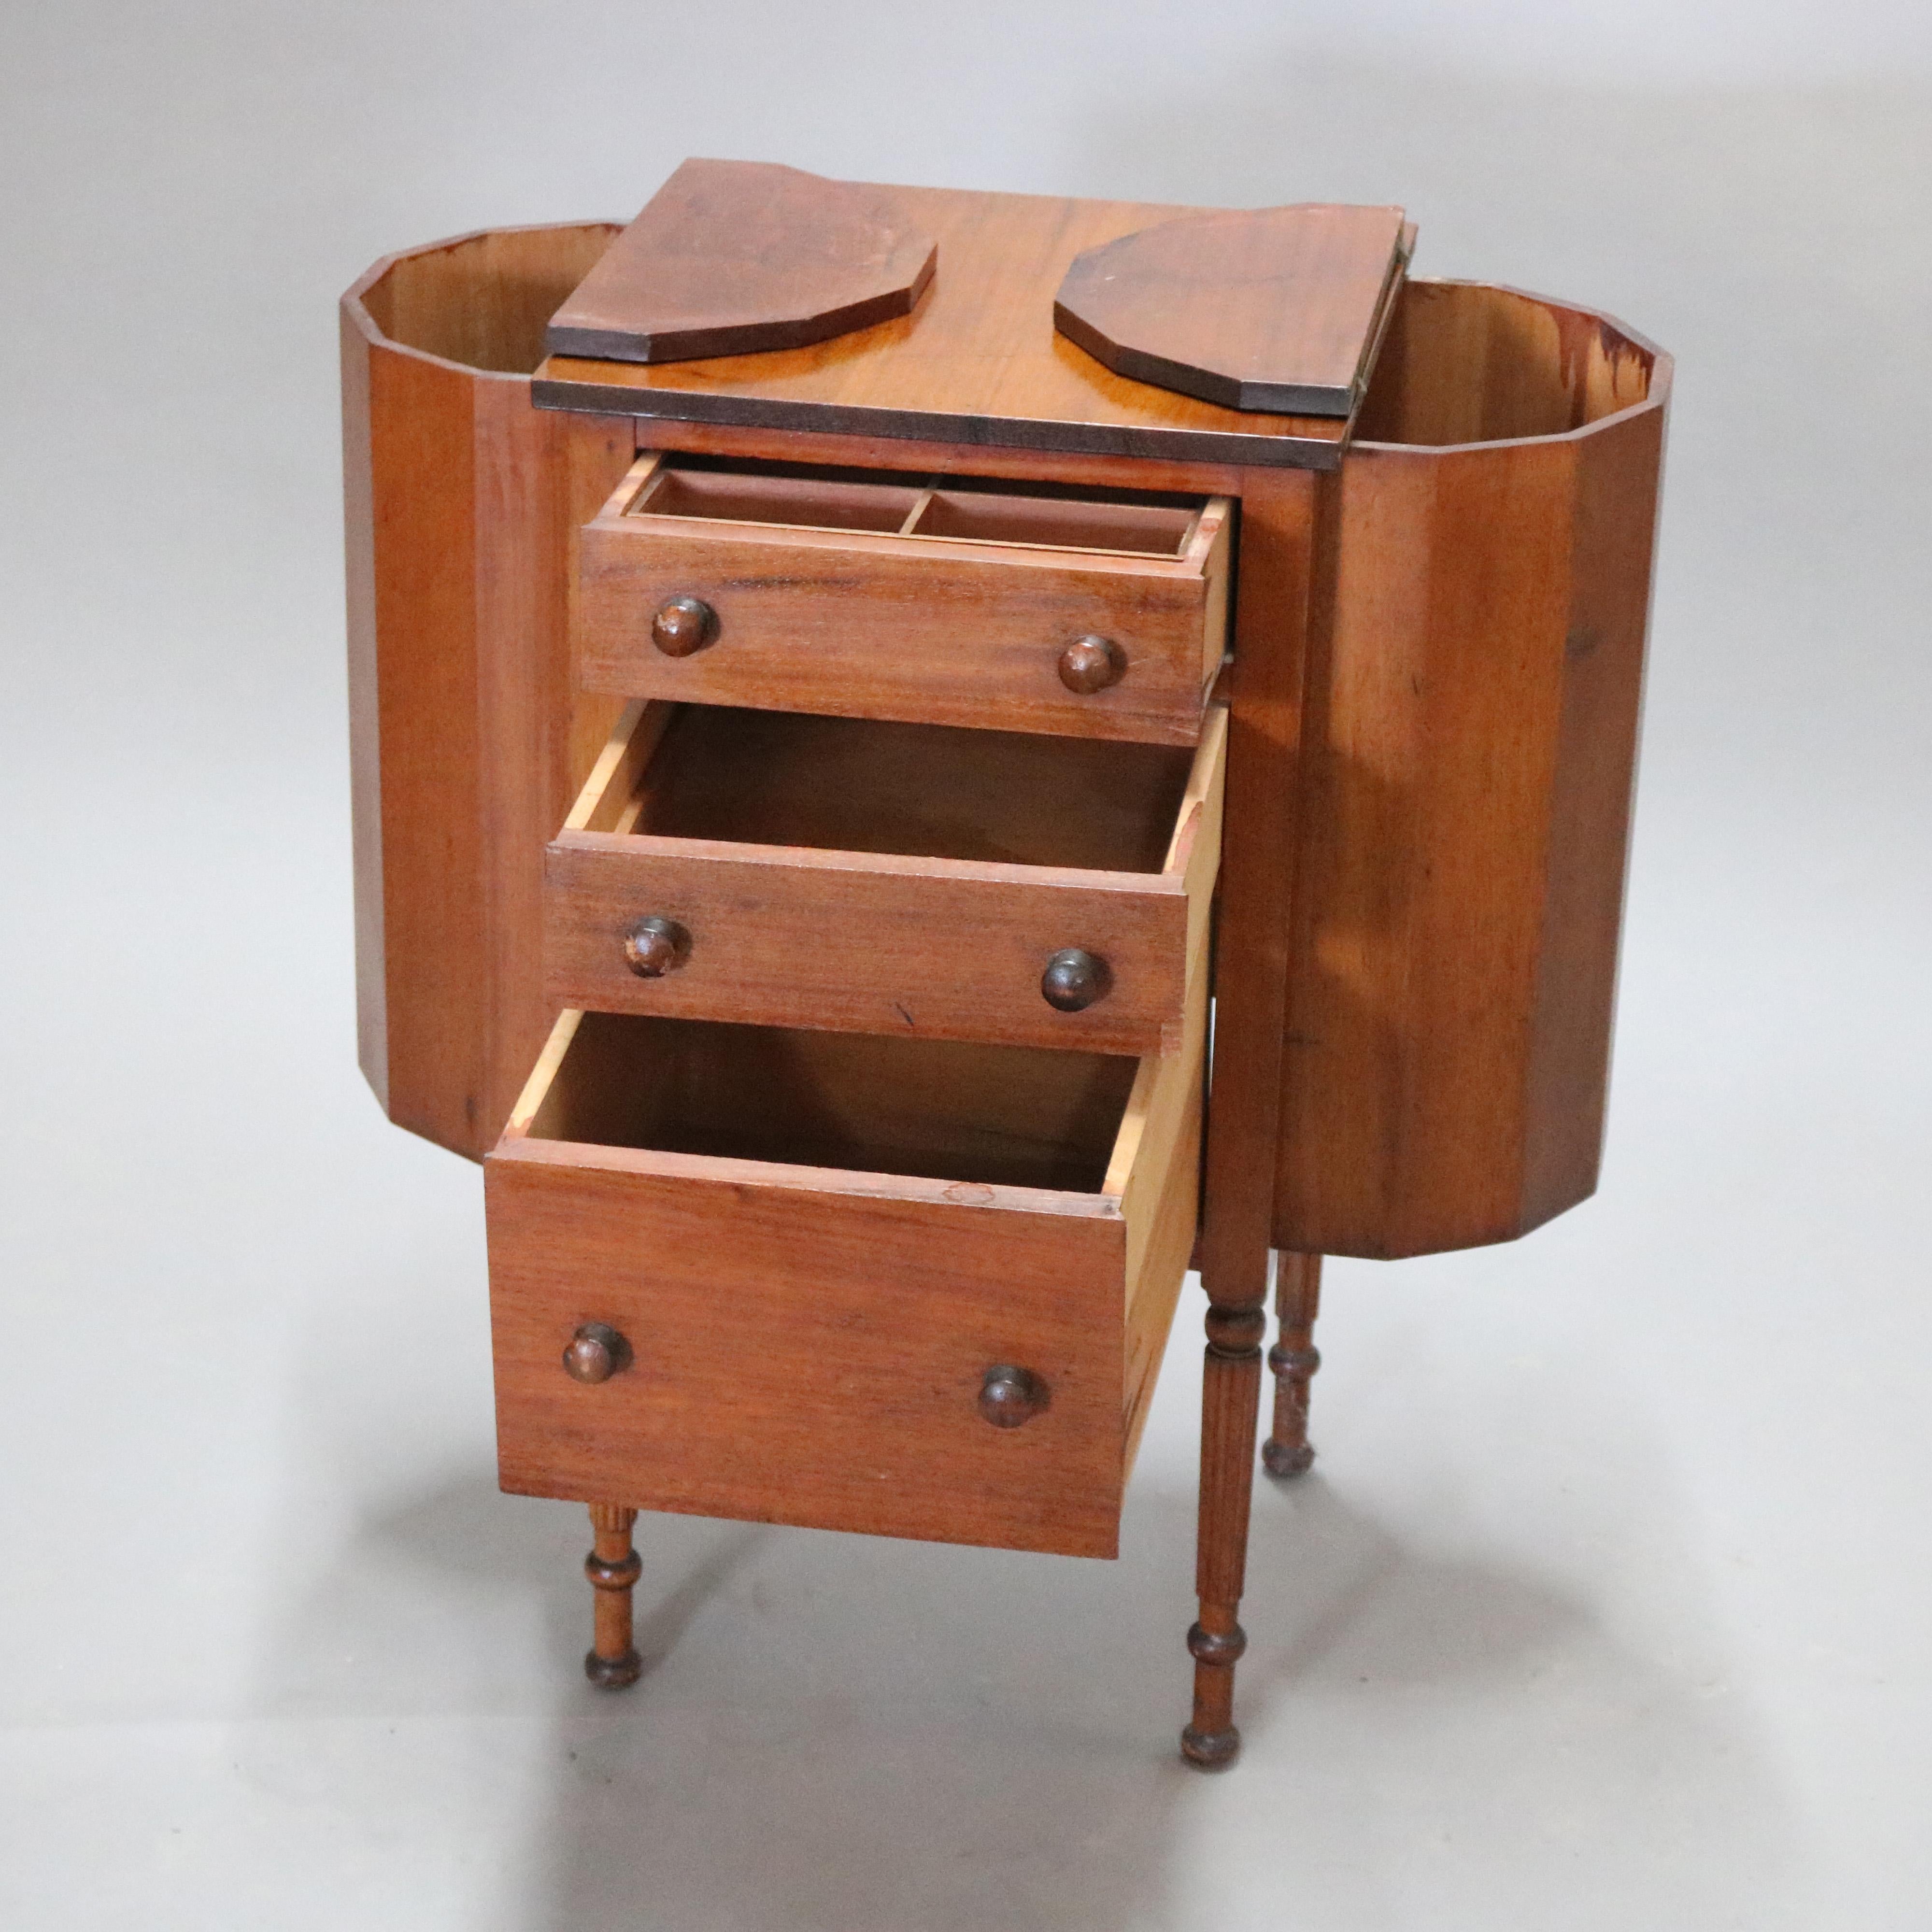 An antique Martha Washington sewing stand or cabinet offers mahogany construction with 
central tower having graduated drawers and flanked by faceted demilune project pockets, raised on turned legs, circa 1930

Measures - 28.75